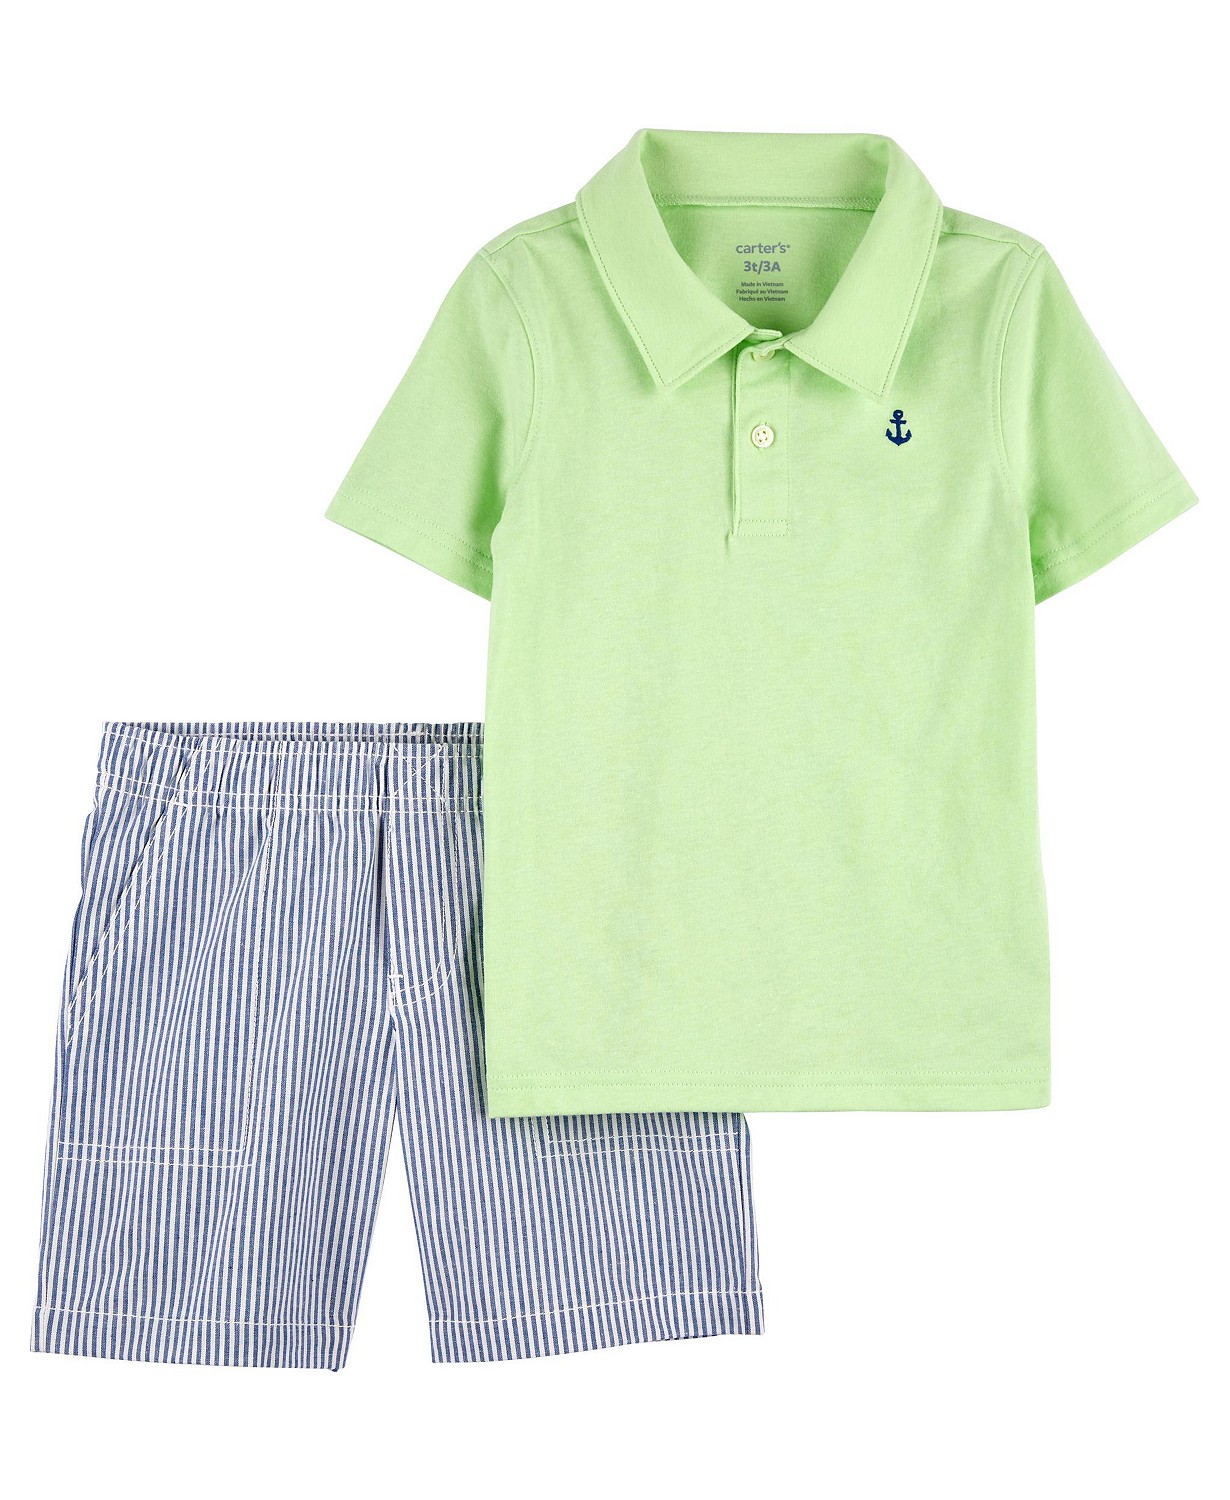 Toddler Boys Polo Shirt and Striped Shorts, 2 Piece Set